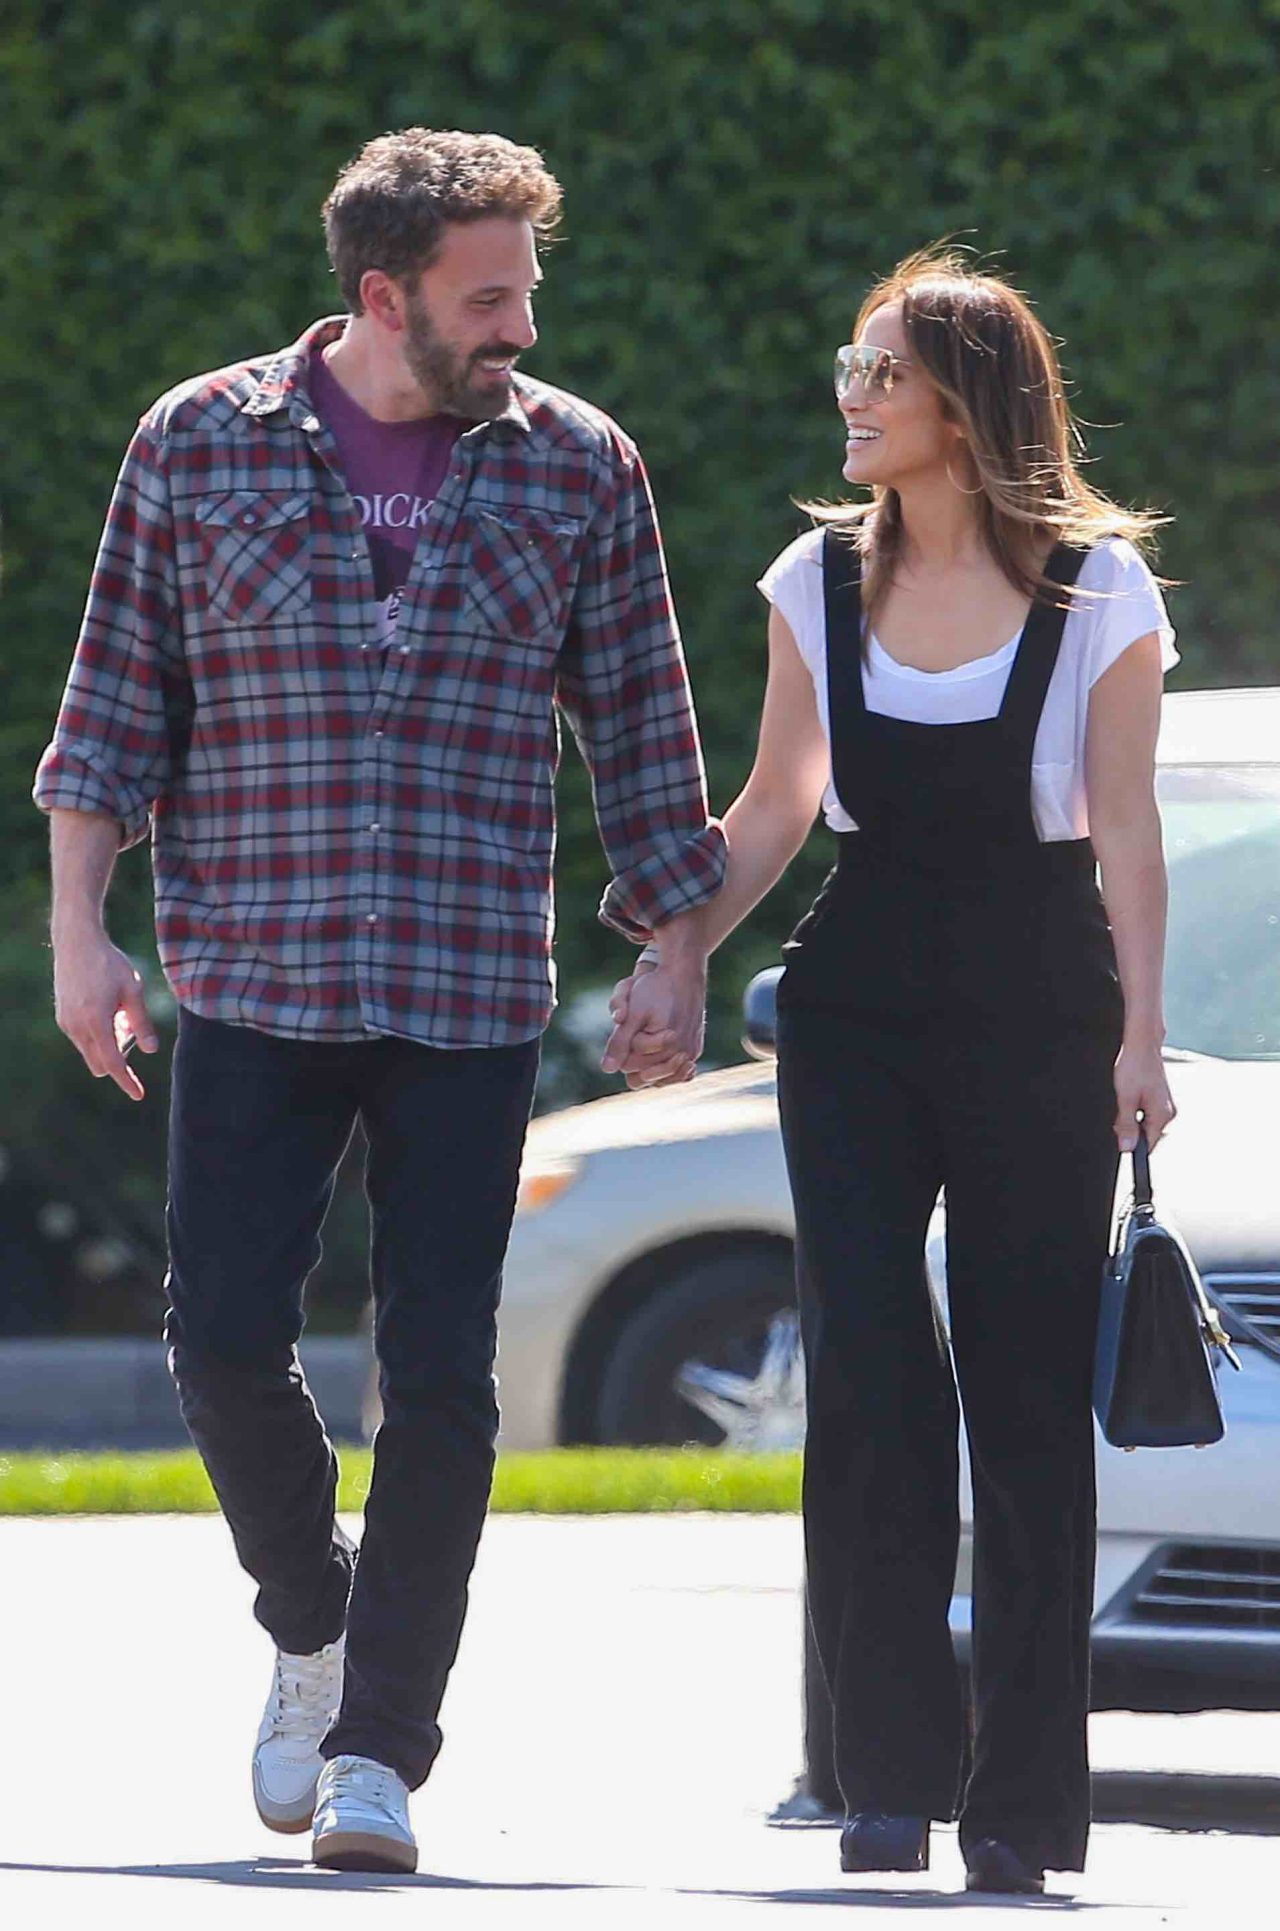 LOS ANGELES, CA - APRIL 13: Ben Affleck and Jennifer Lopez are seen on April 13, 2022 in Los Angeles, California.  (Photo by Bellocqimages/Bauer-Griffin/GC Images)